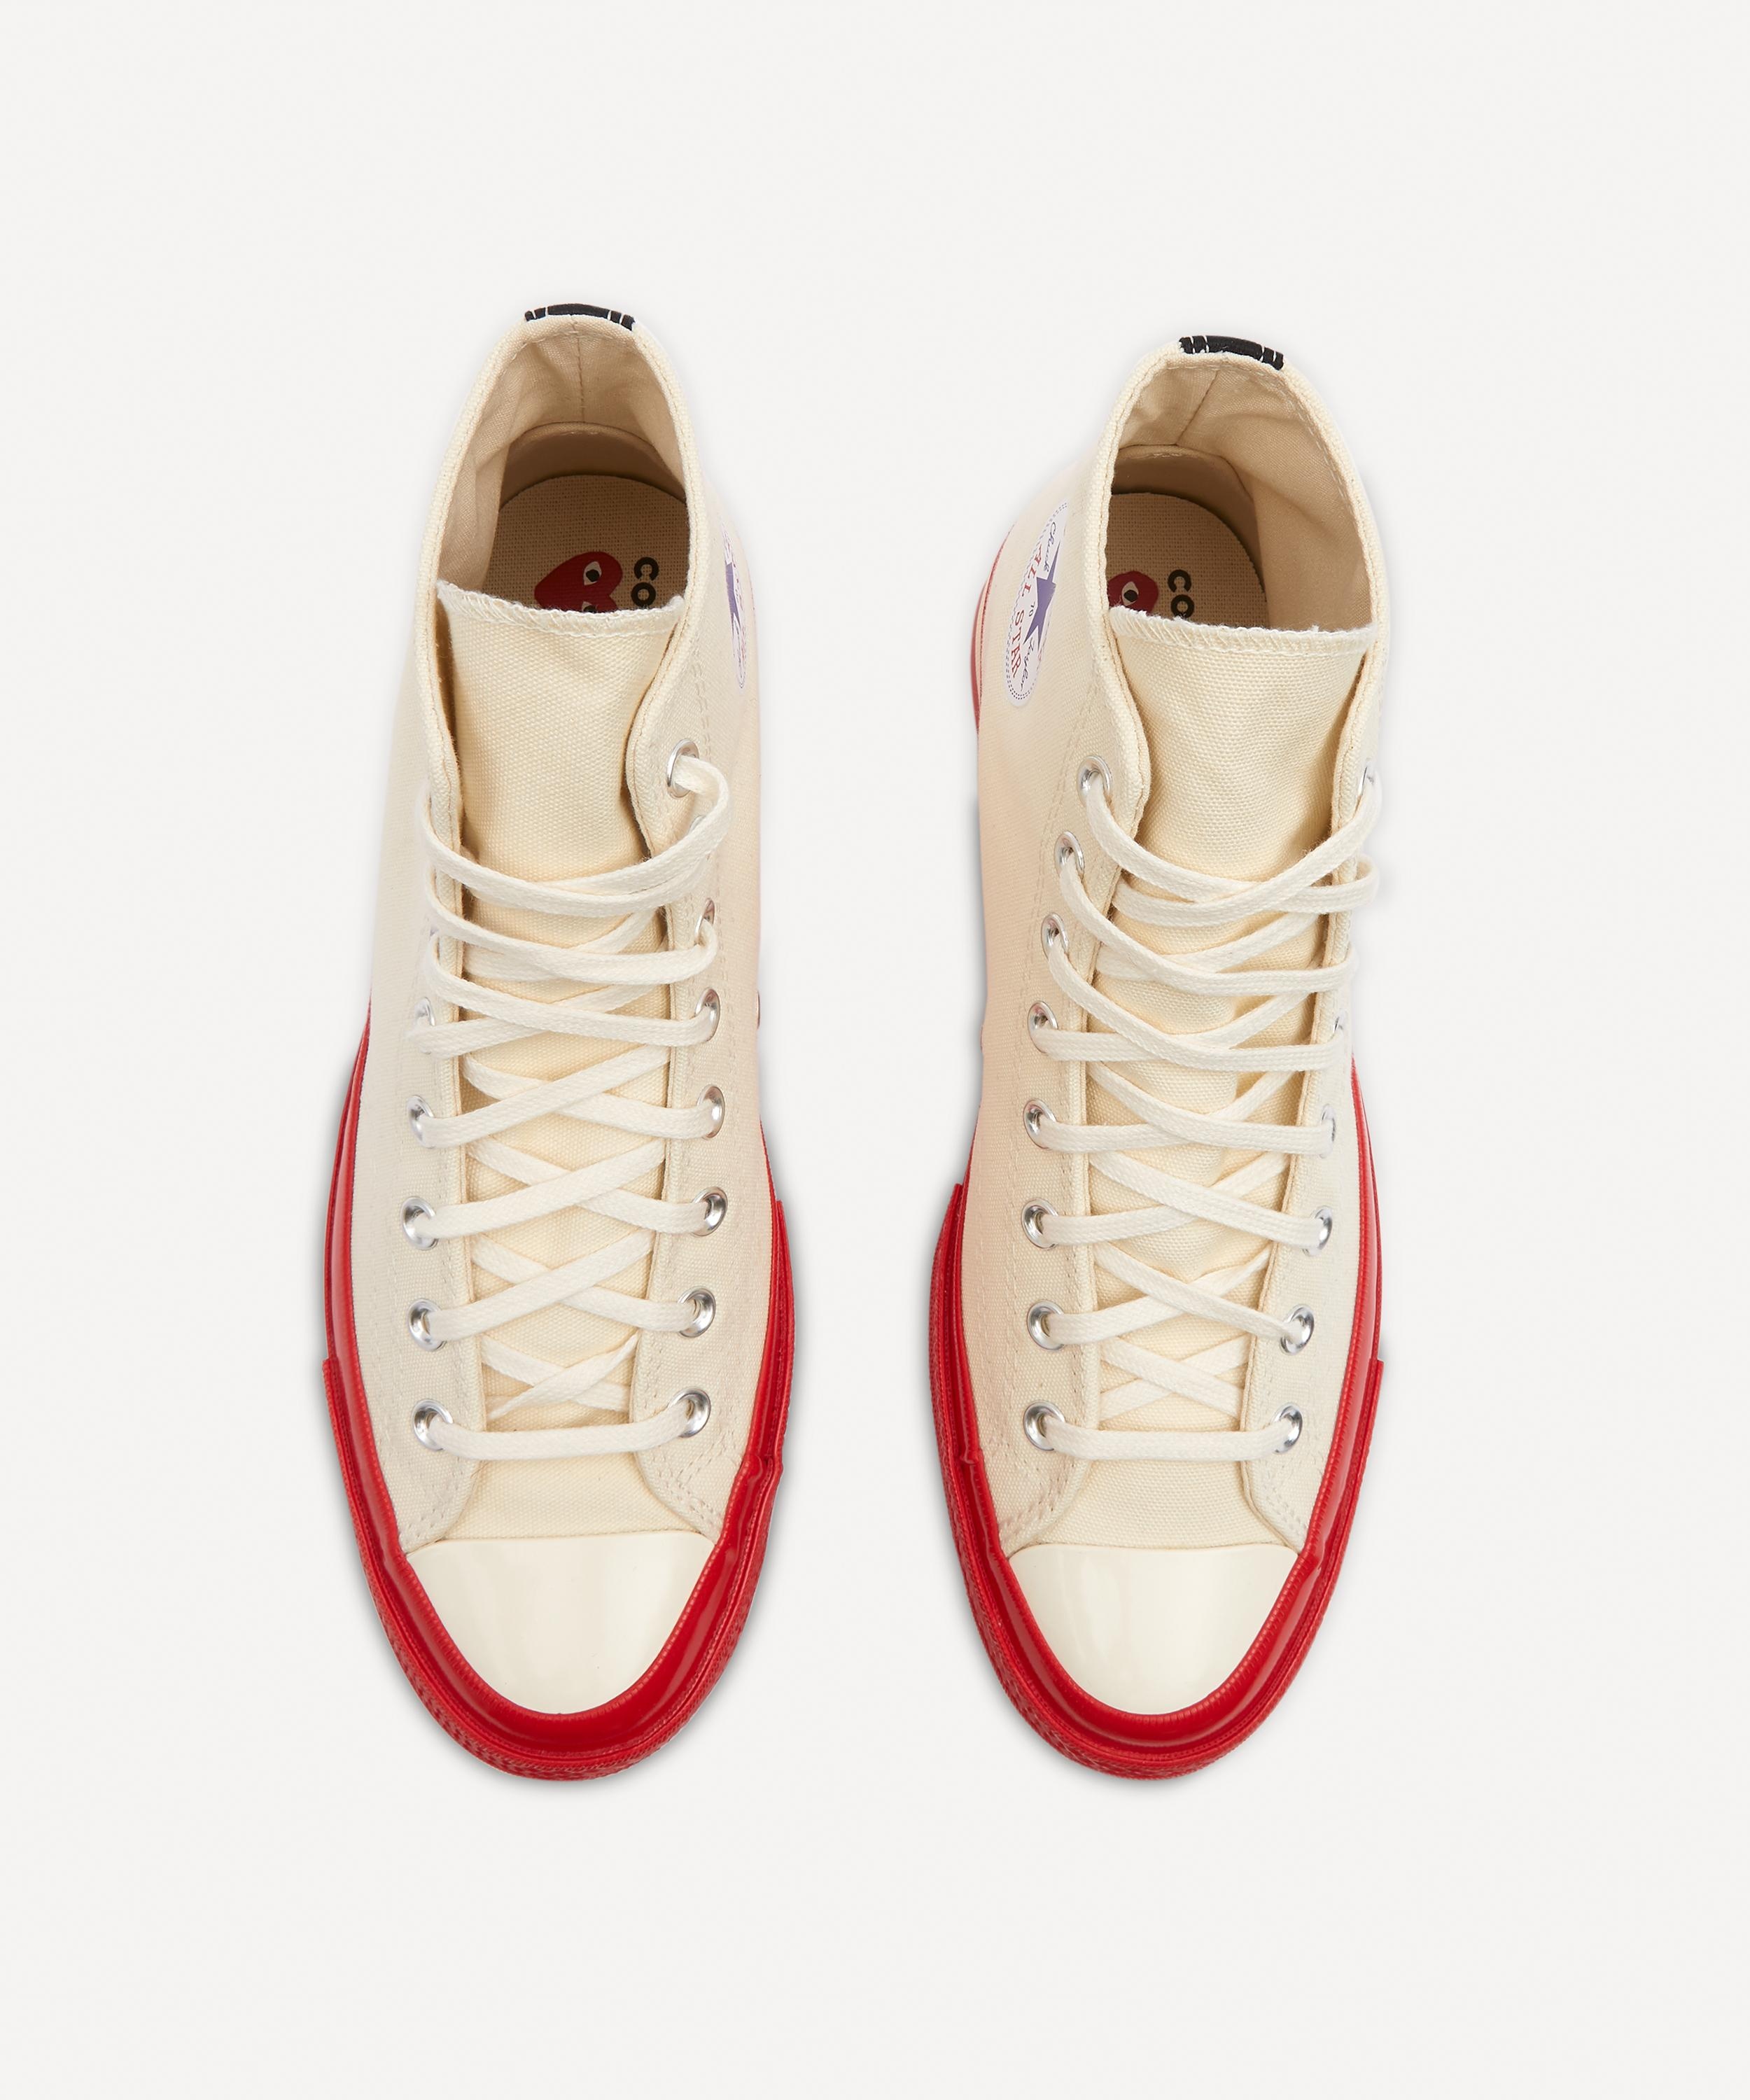 x Converse 70s Hi-Top Red Sole Canvas Trainers - 3